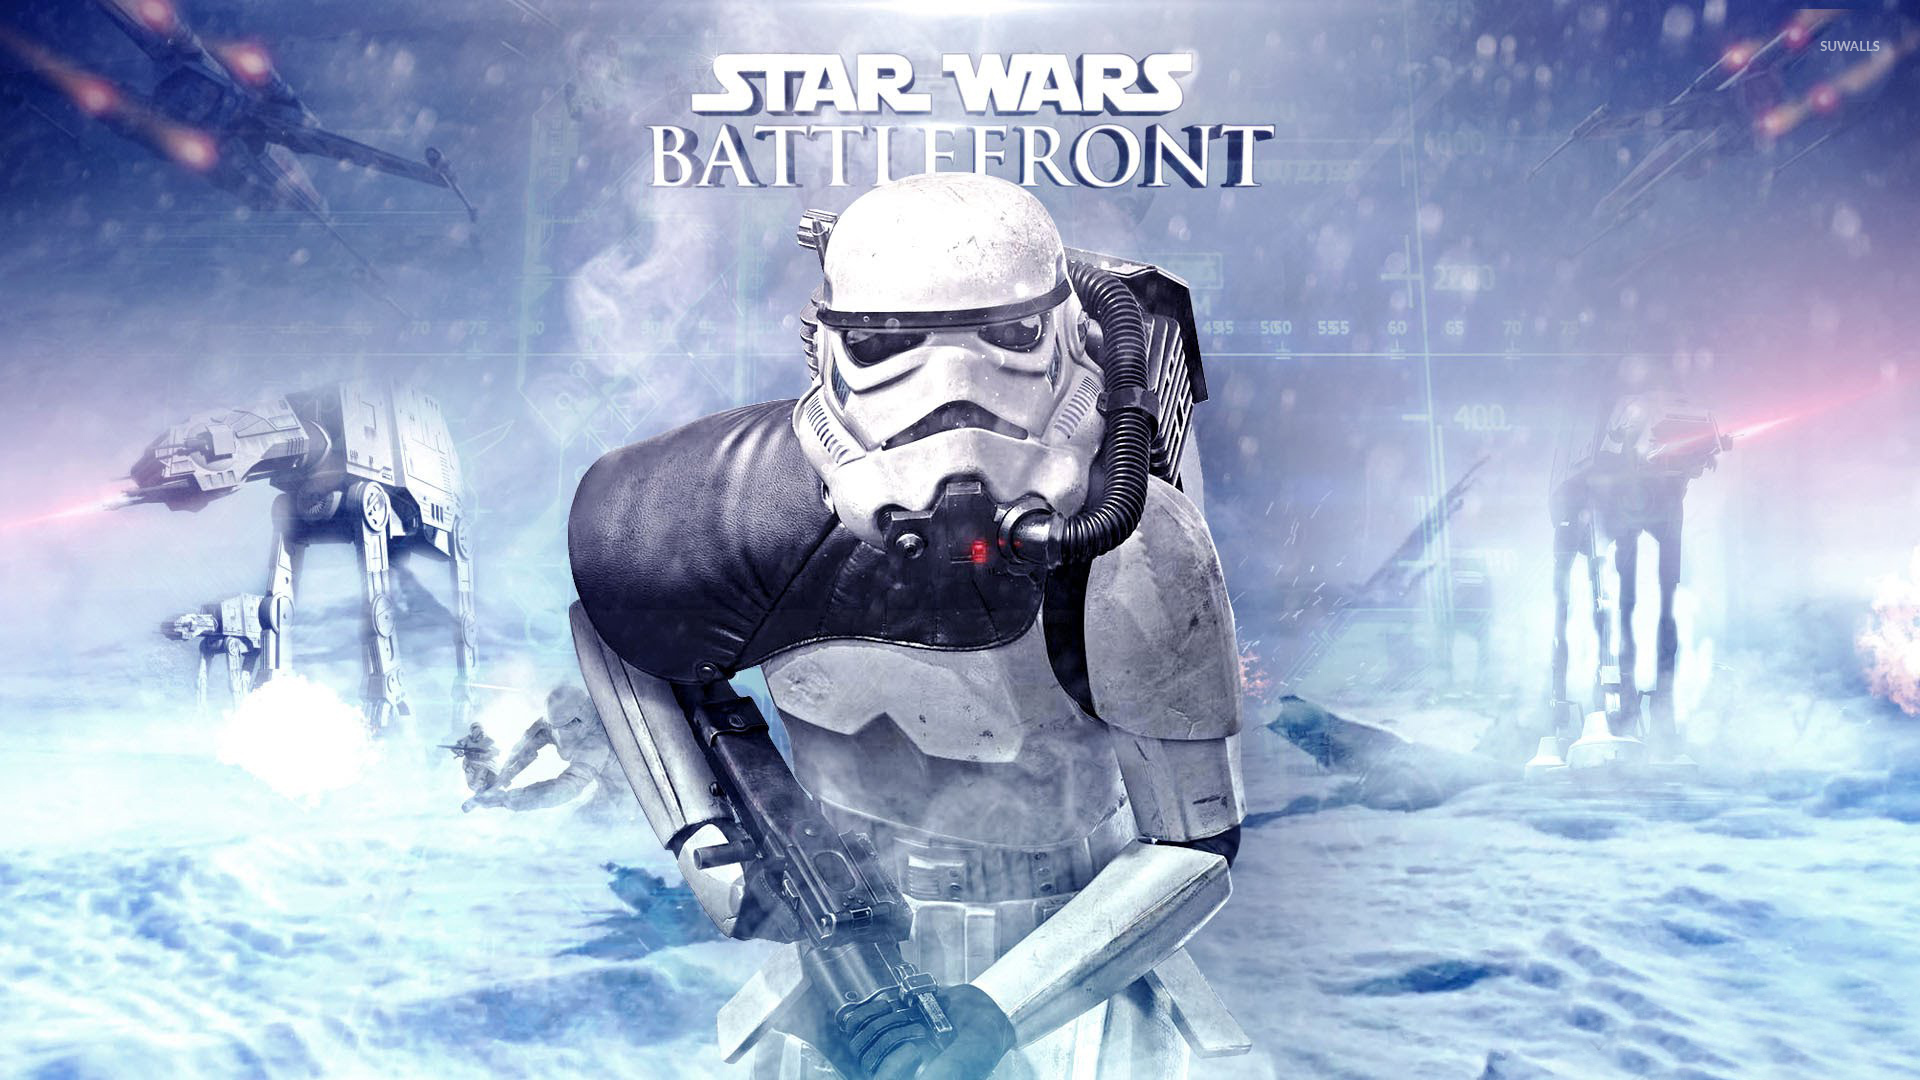 At Ats And Stormtrooper In Star Wars Battlefront Wallpaper